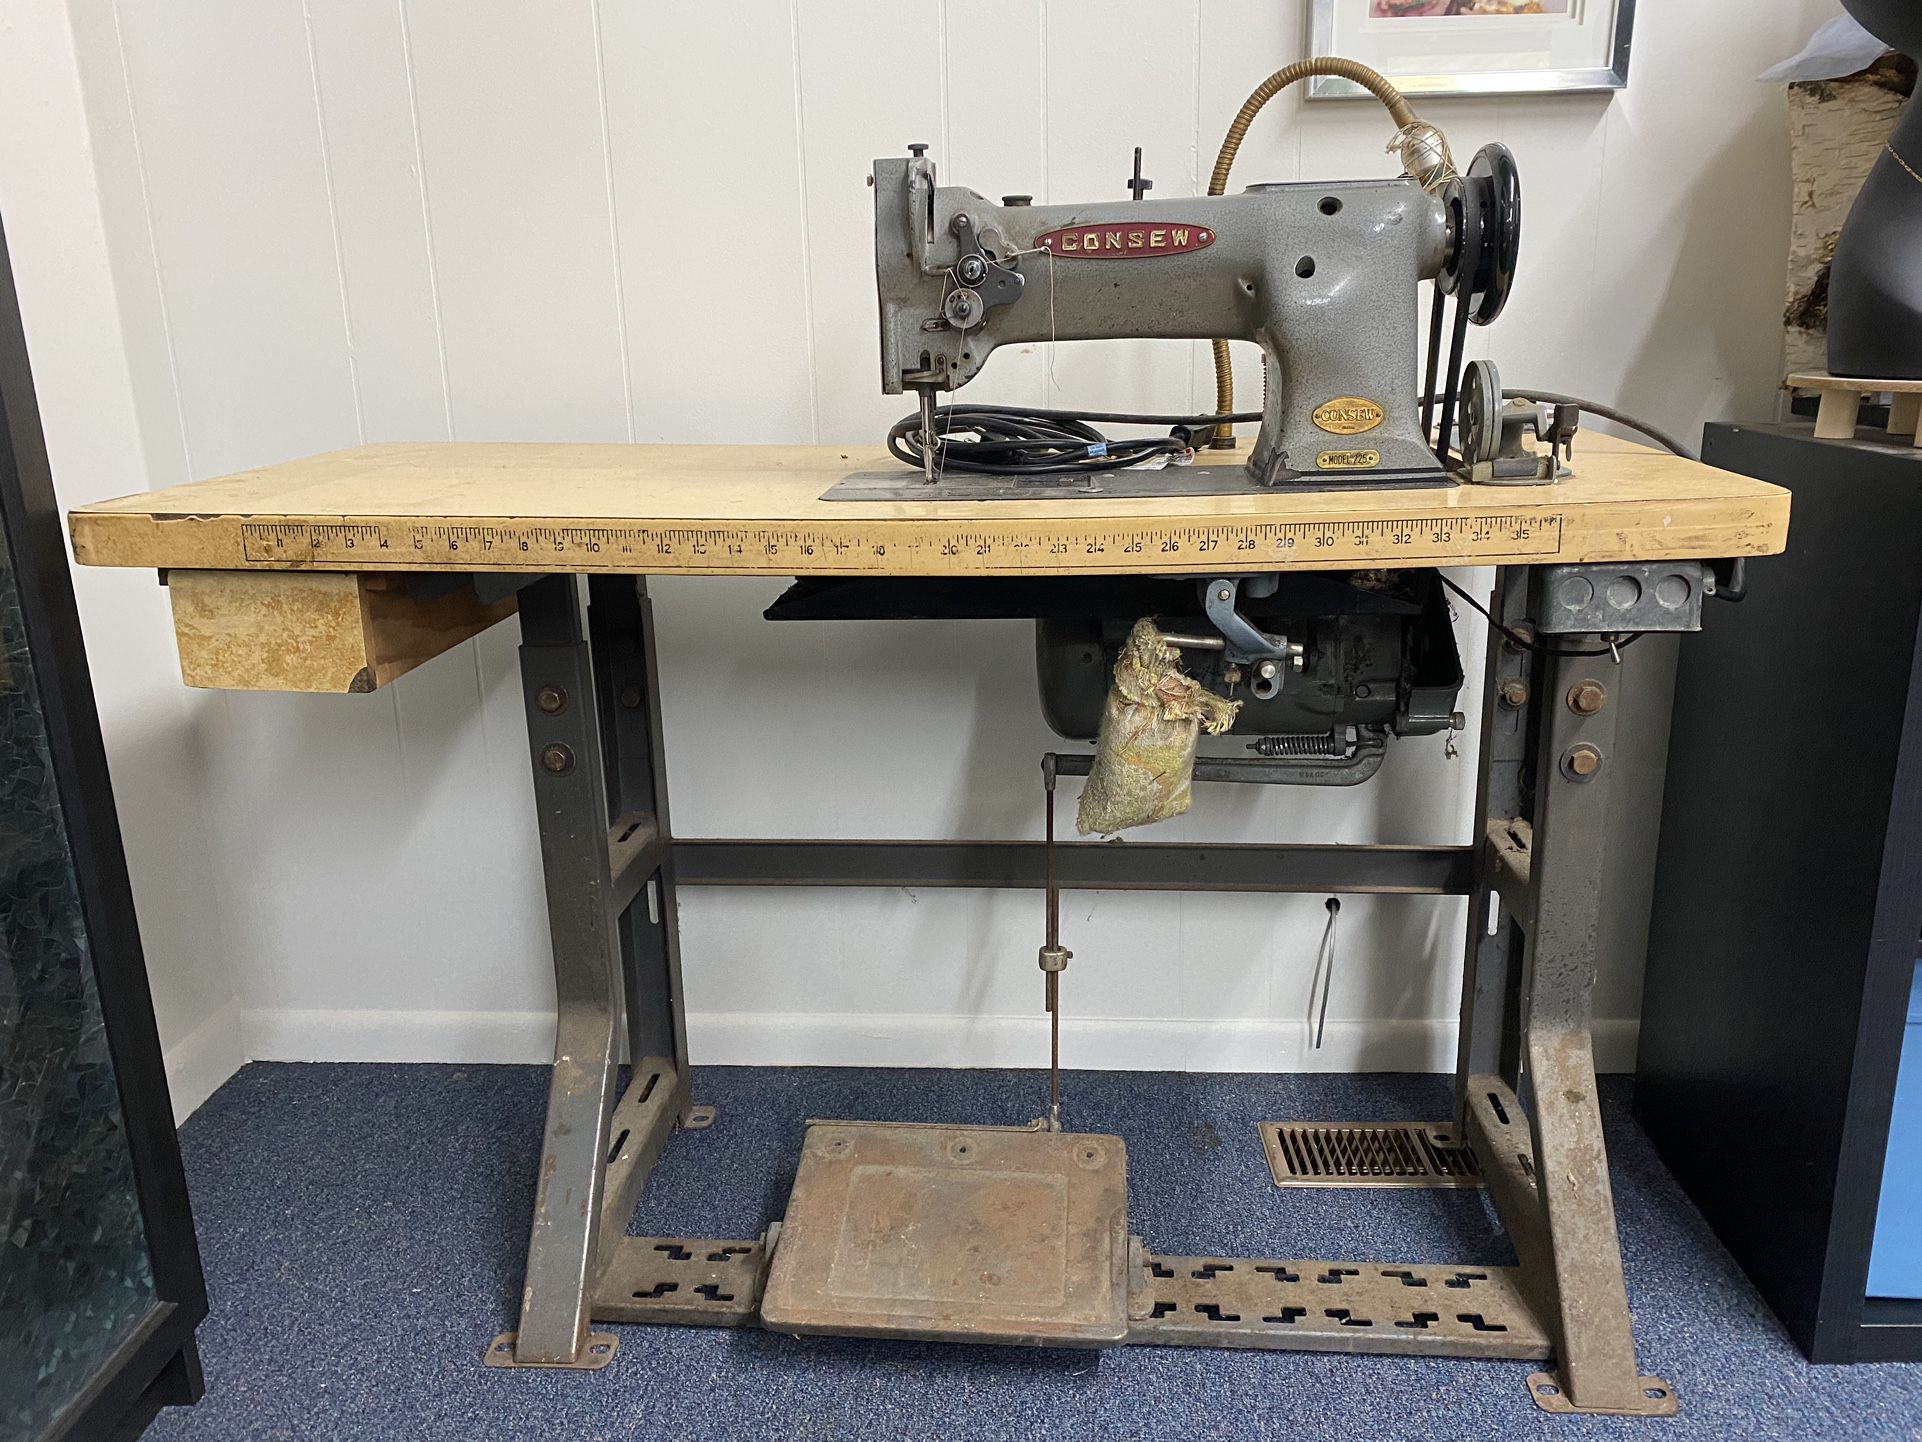 Consew Model 225 Industrial Sewing Machine with upgraded motor, walking foot and knee pedal